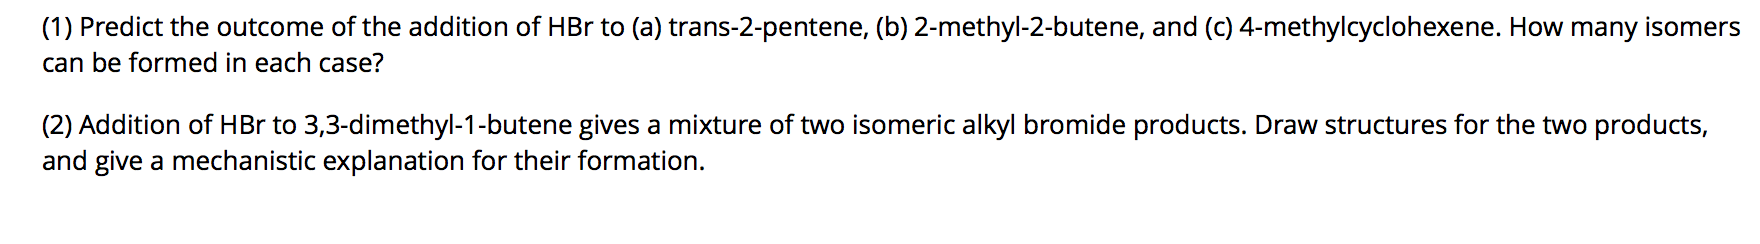 (1) Predict the outcome of the addition of HBr to (a) trans-2-pentene, (b) 2-methyl-2-butene, and (c) 4-methylcyclohexene. How many isomers
can be formed in each case?
